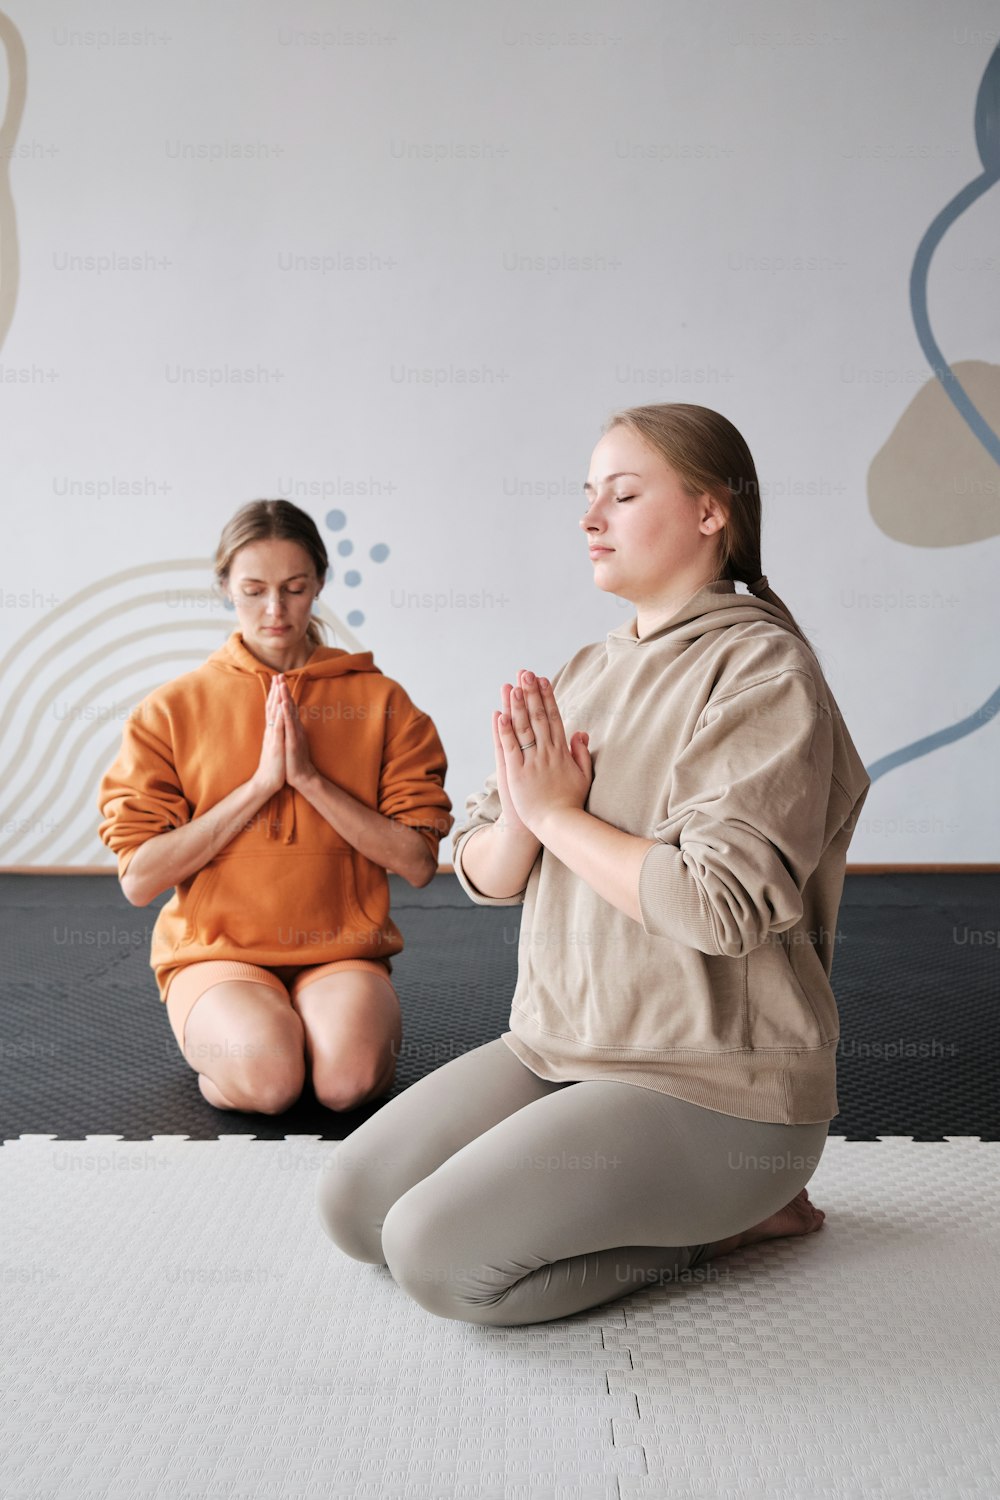 two women sitting on a mat in a yoga pose